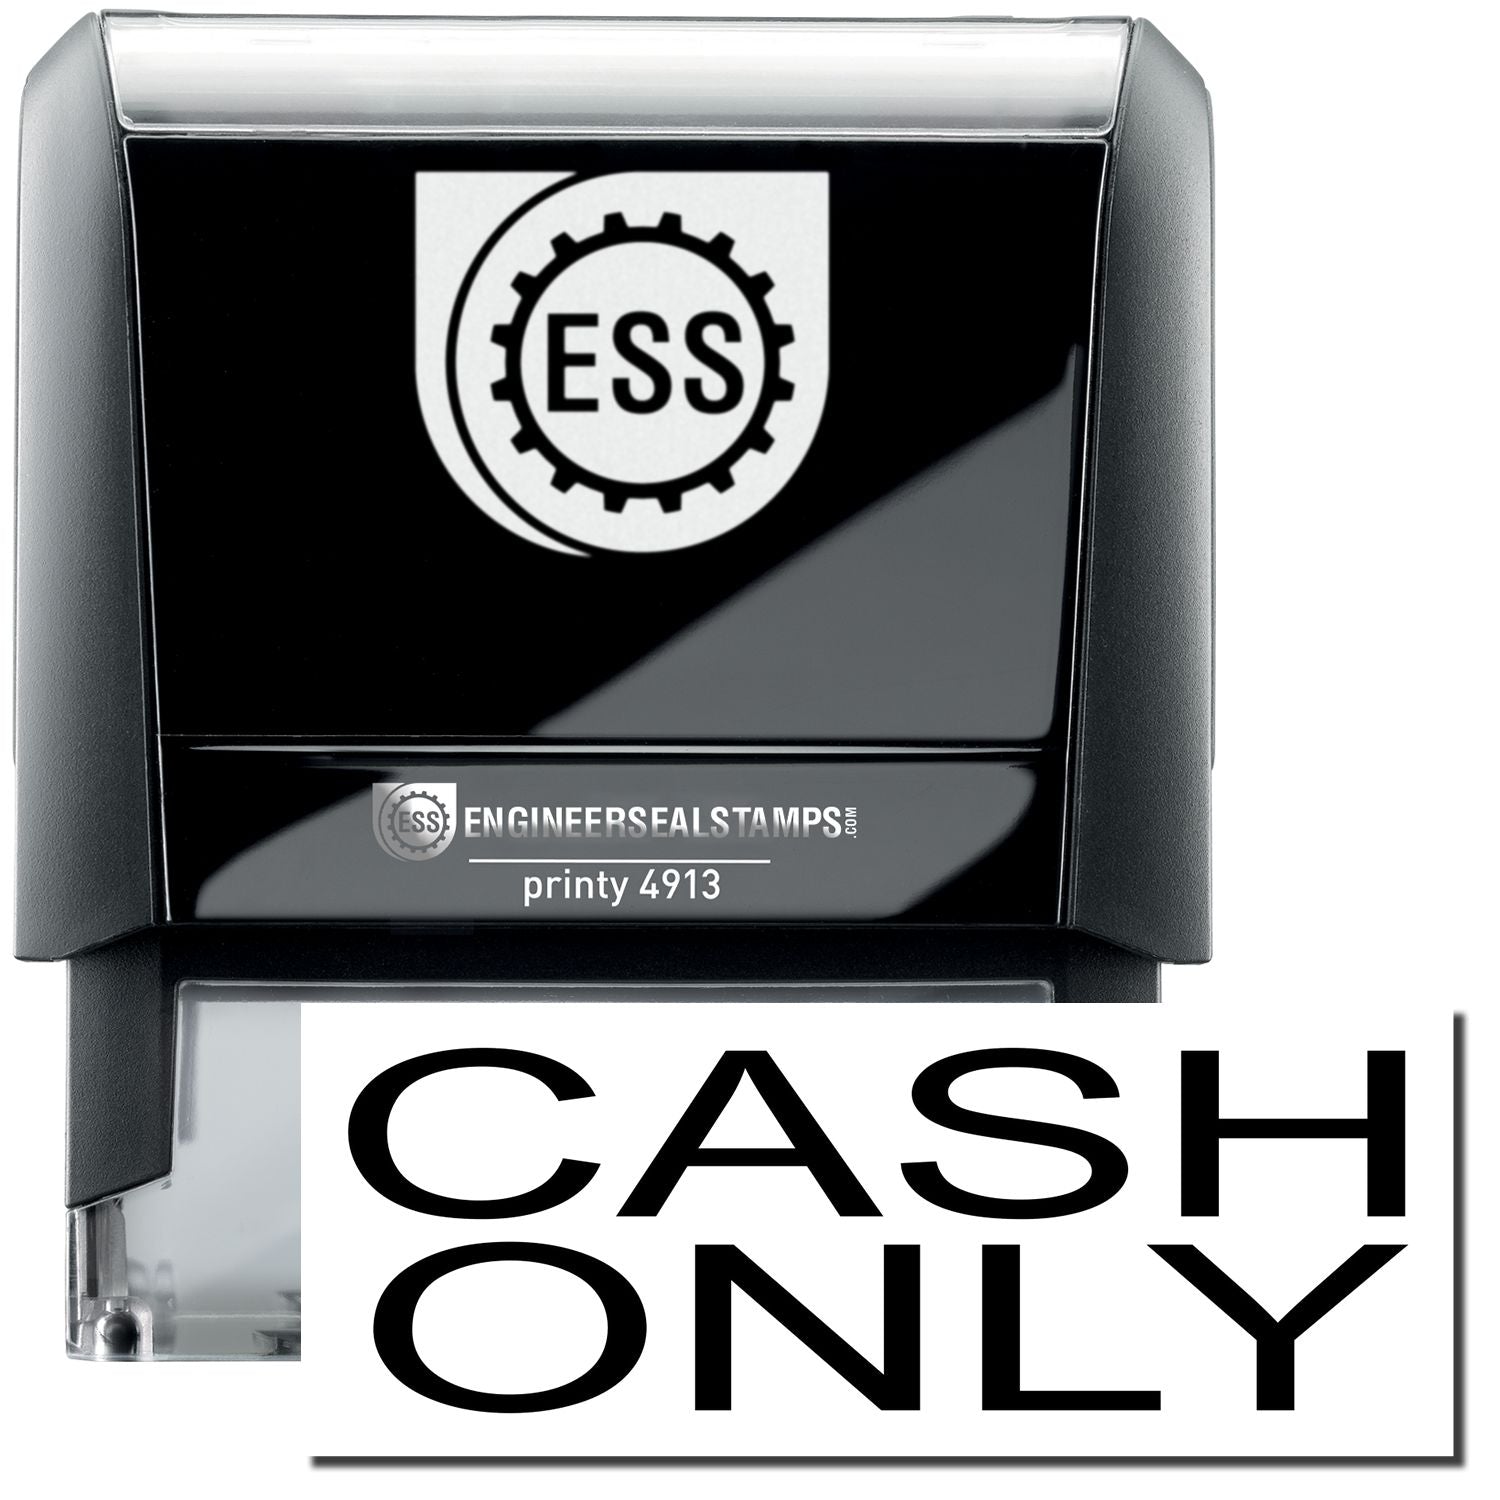 A self-inking stamp with a stamped image showing how the text "CASH ONLY" in a large bold font is displayed by it.